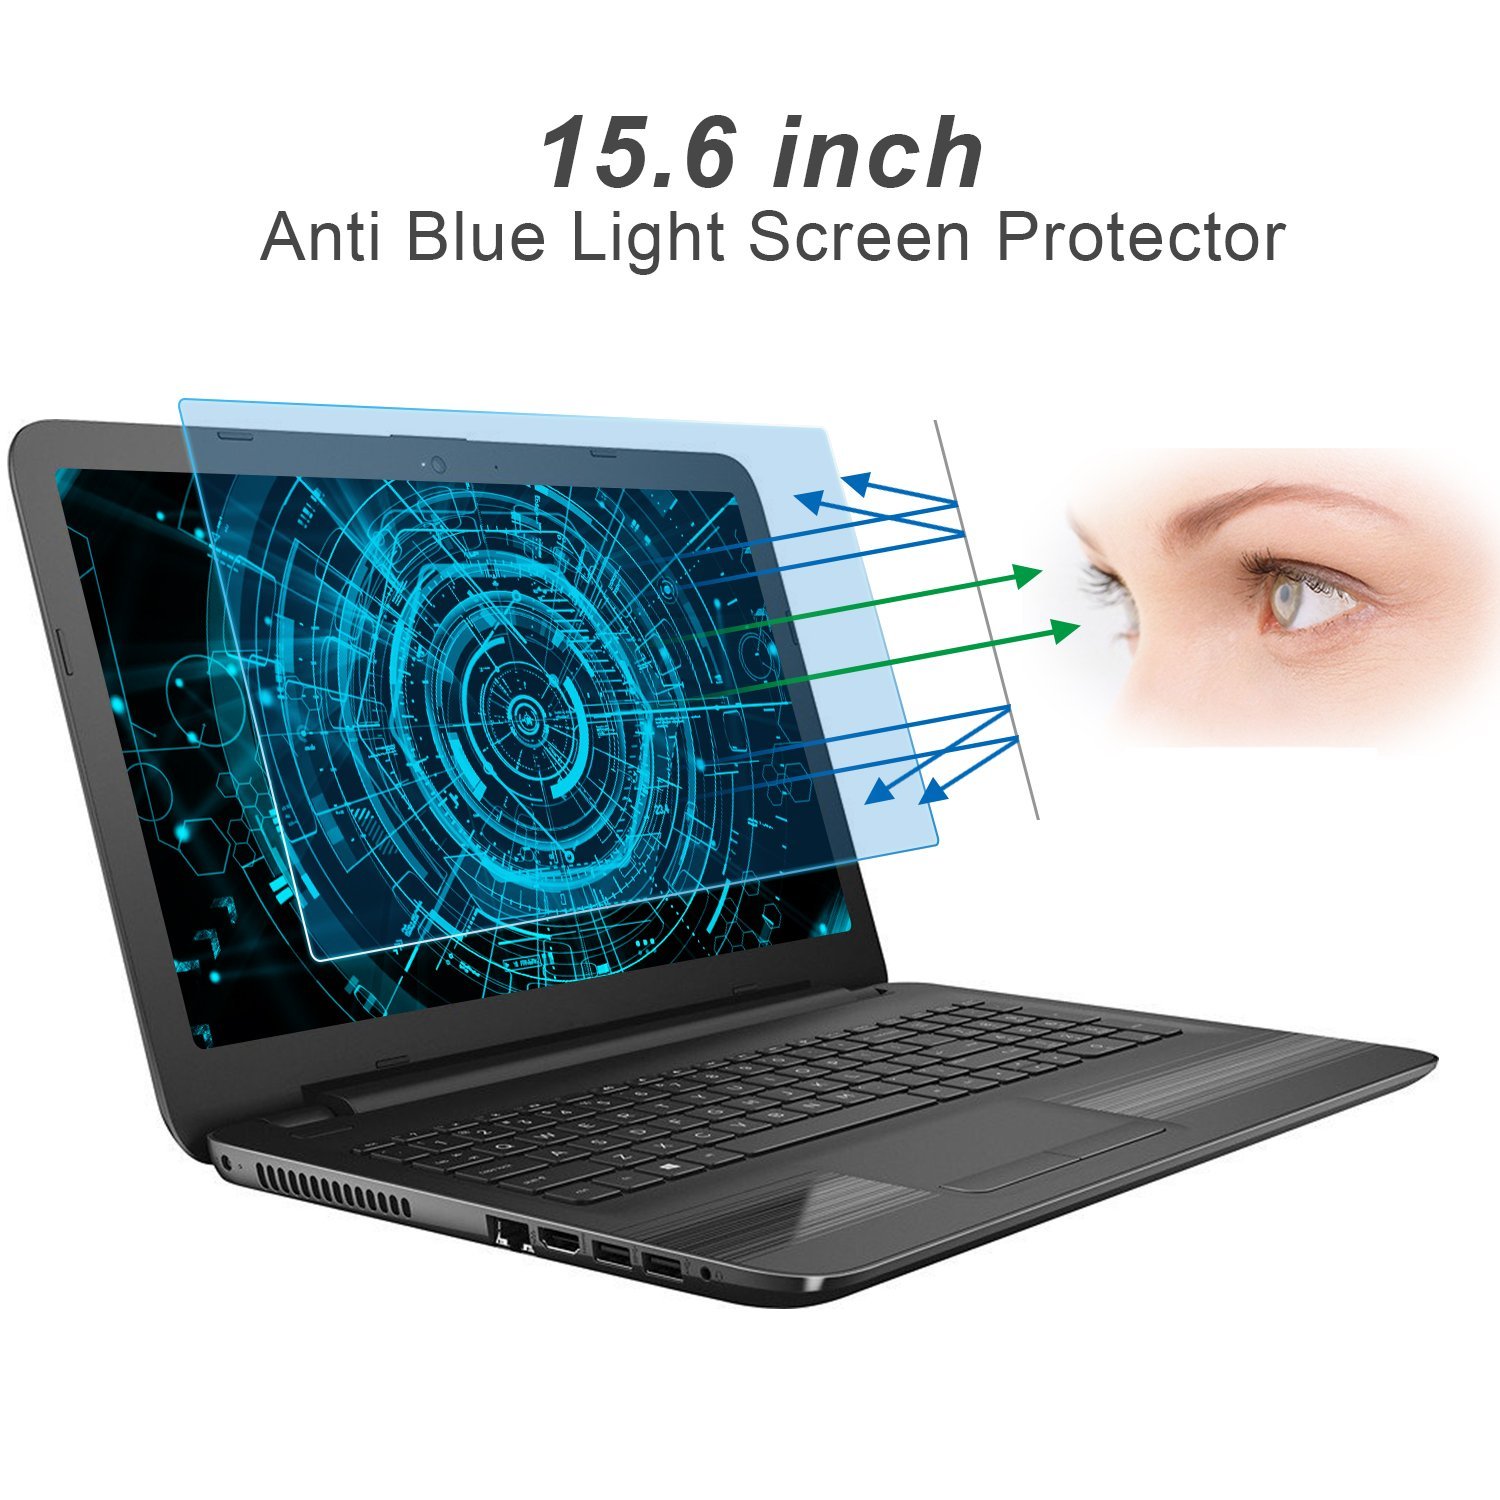 15/6 PULGADA EYE PROTECTION ANTI BLUE LIGHT SCREEN PROTECTOR FOR HP/DELL/ASUS/ACER/SONY/SAMGSUNG WITH 16/9 ASPECT RATIO LAPTOP